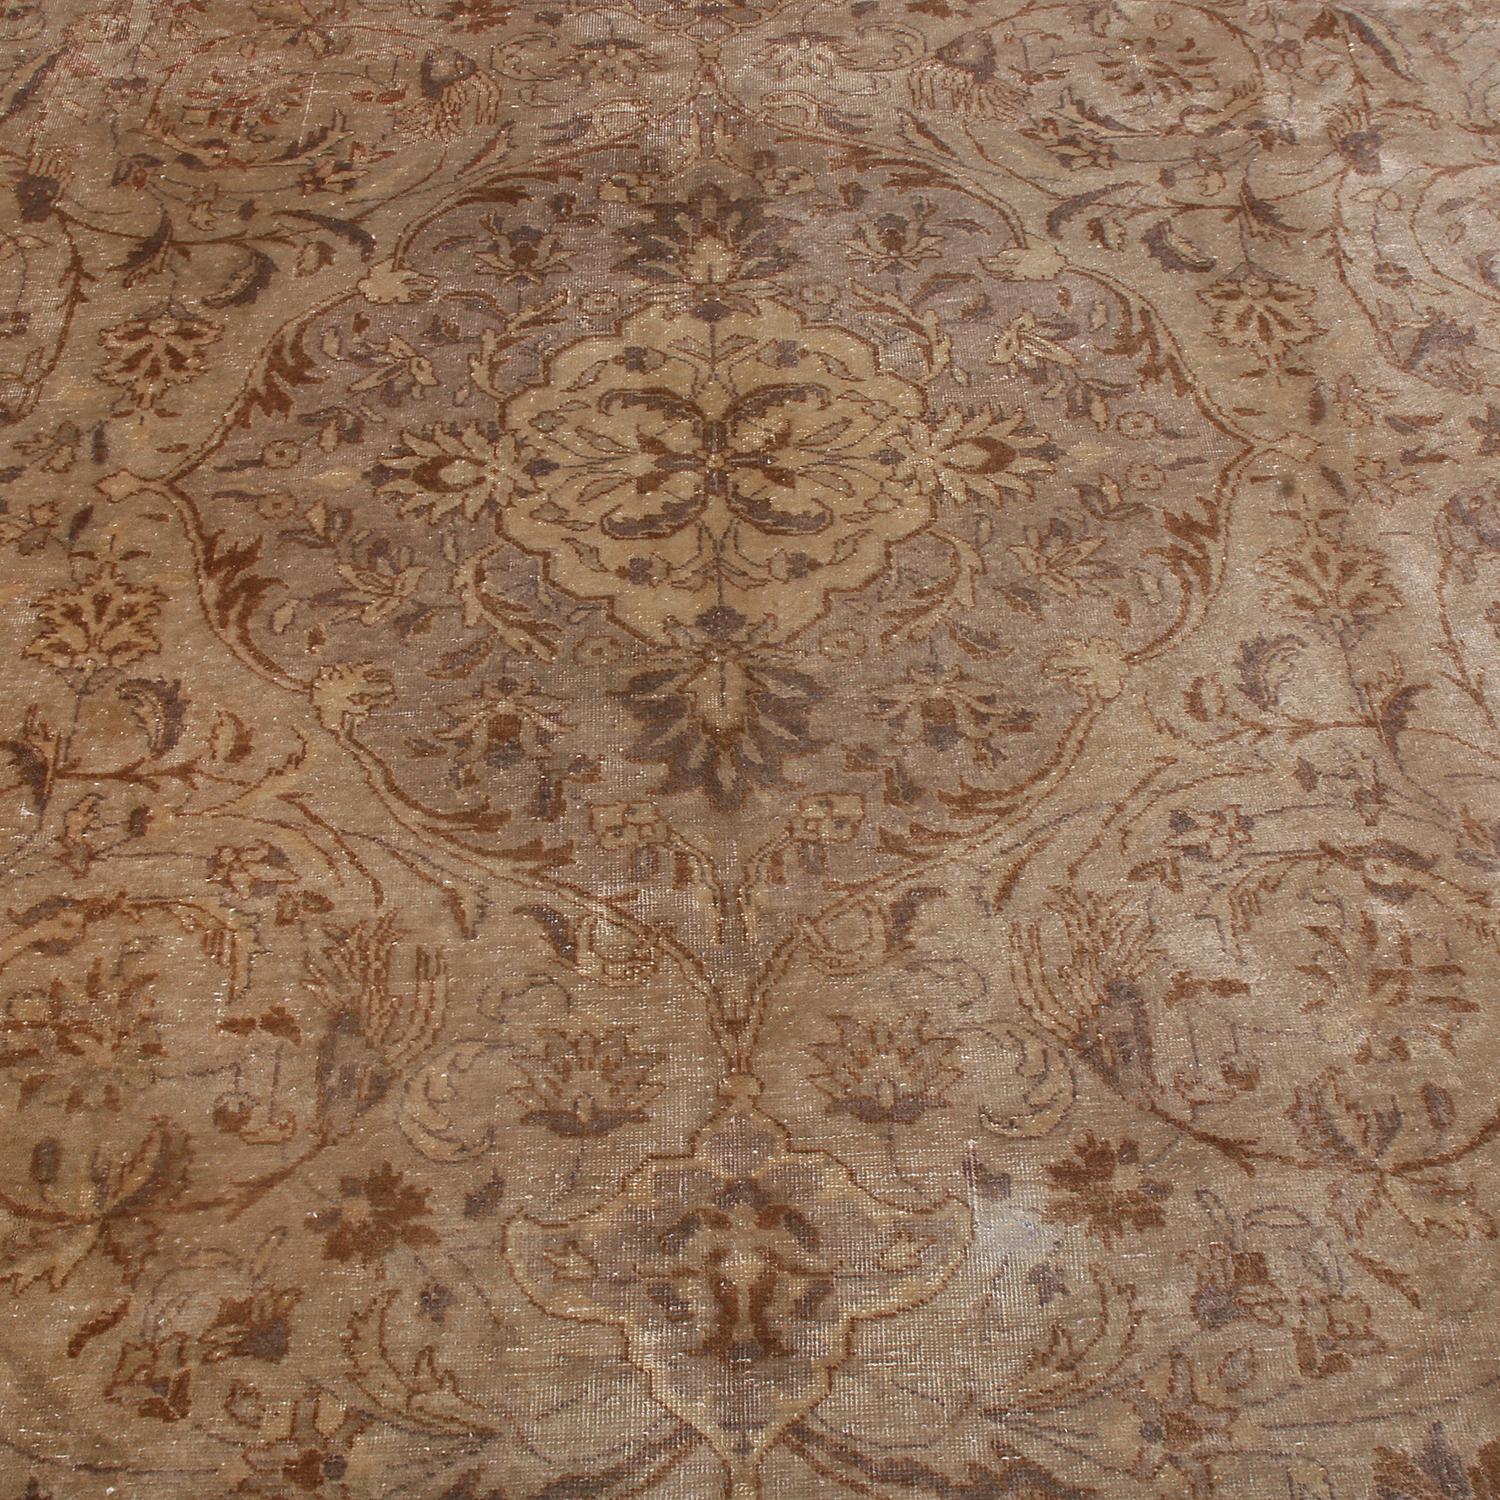 Late 19th Century Antique Tabriz Floral Beige-Brown Wool Persian Rug